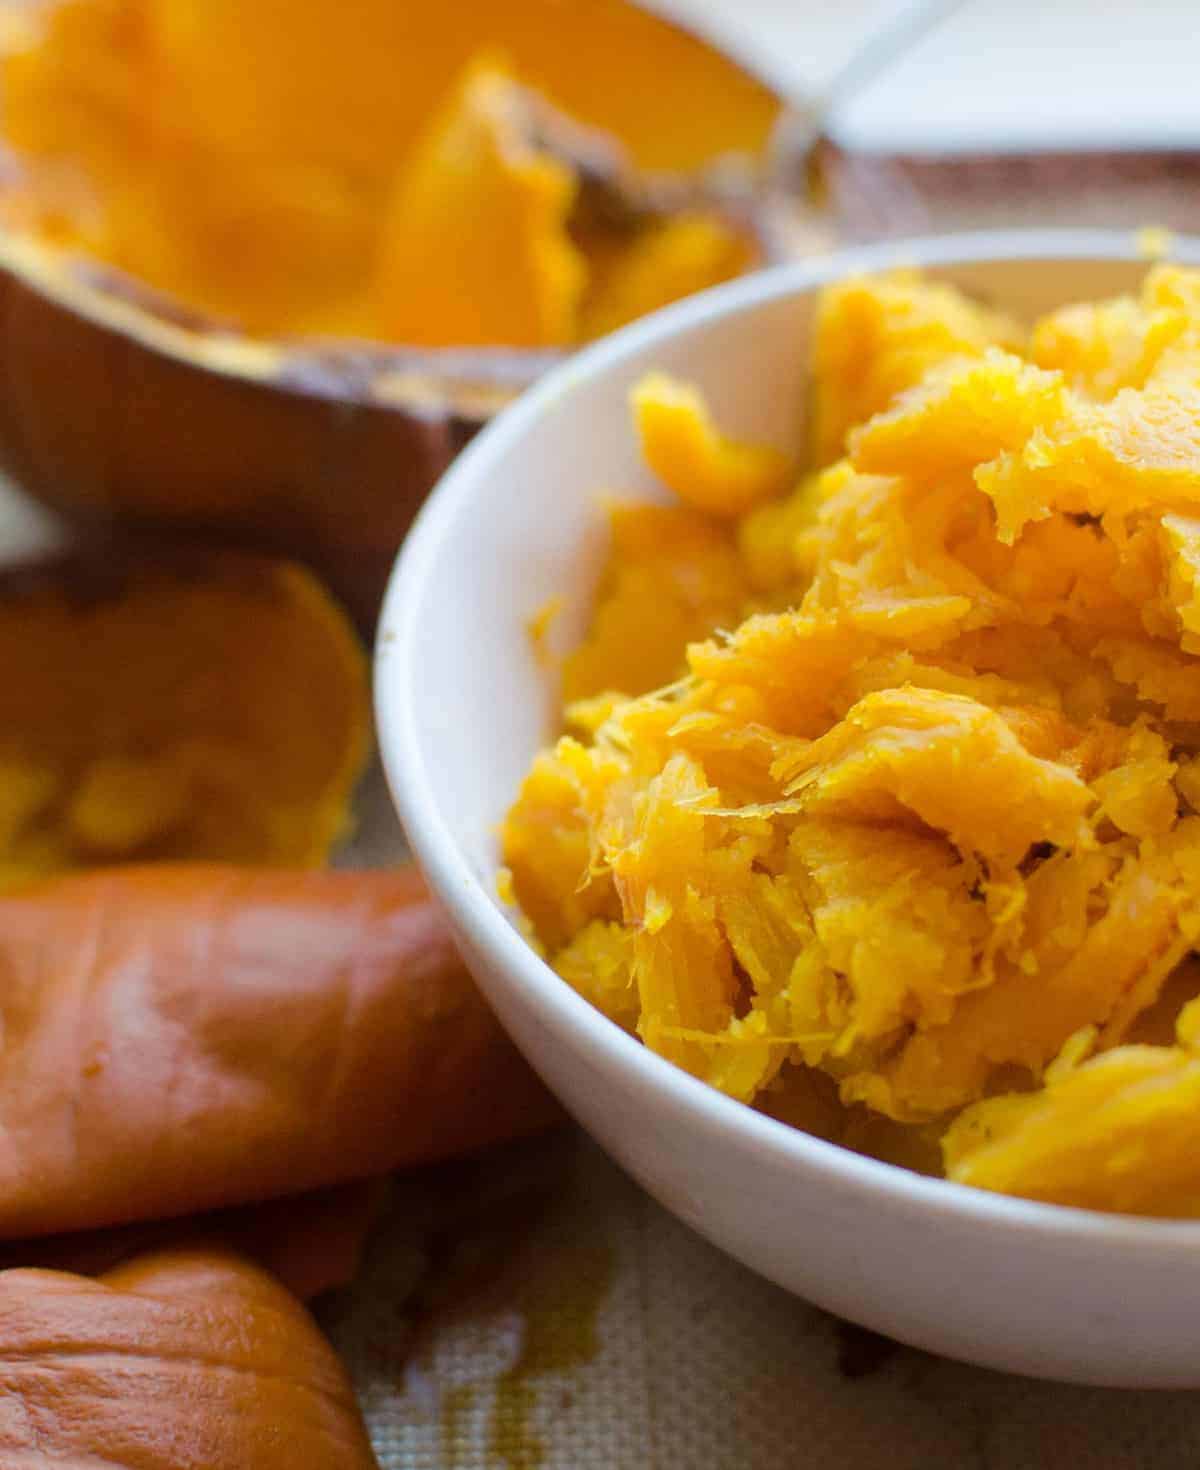 Homemade pumpkin puree is as simple as roasting, scooping, and blending a fresh pumpkin into a simple puree. You are going to love it's bright color, smooth texture, and simple preparation.